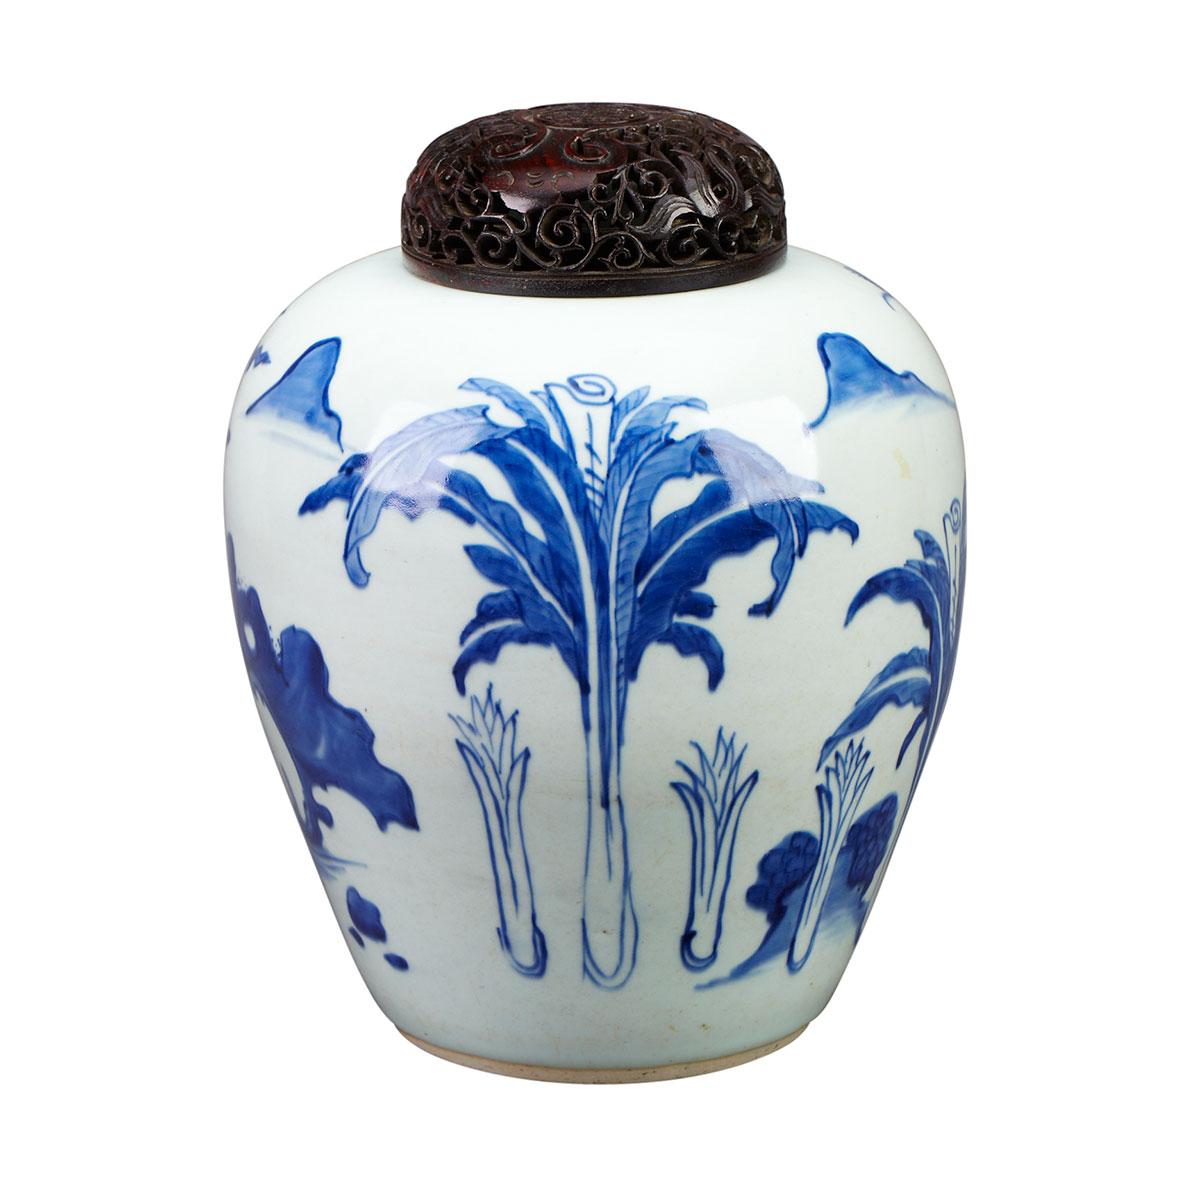 Blue and White Ginger Jar, Transitional Period, 17th Century